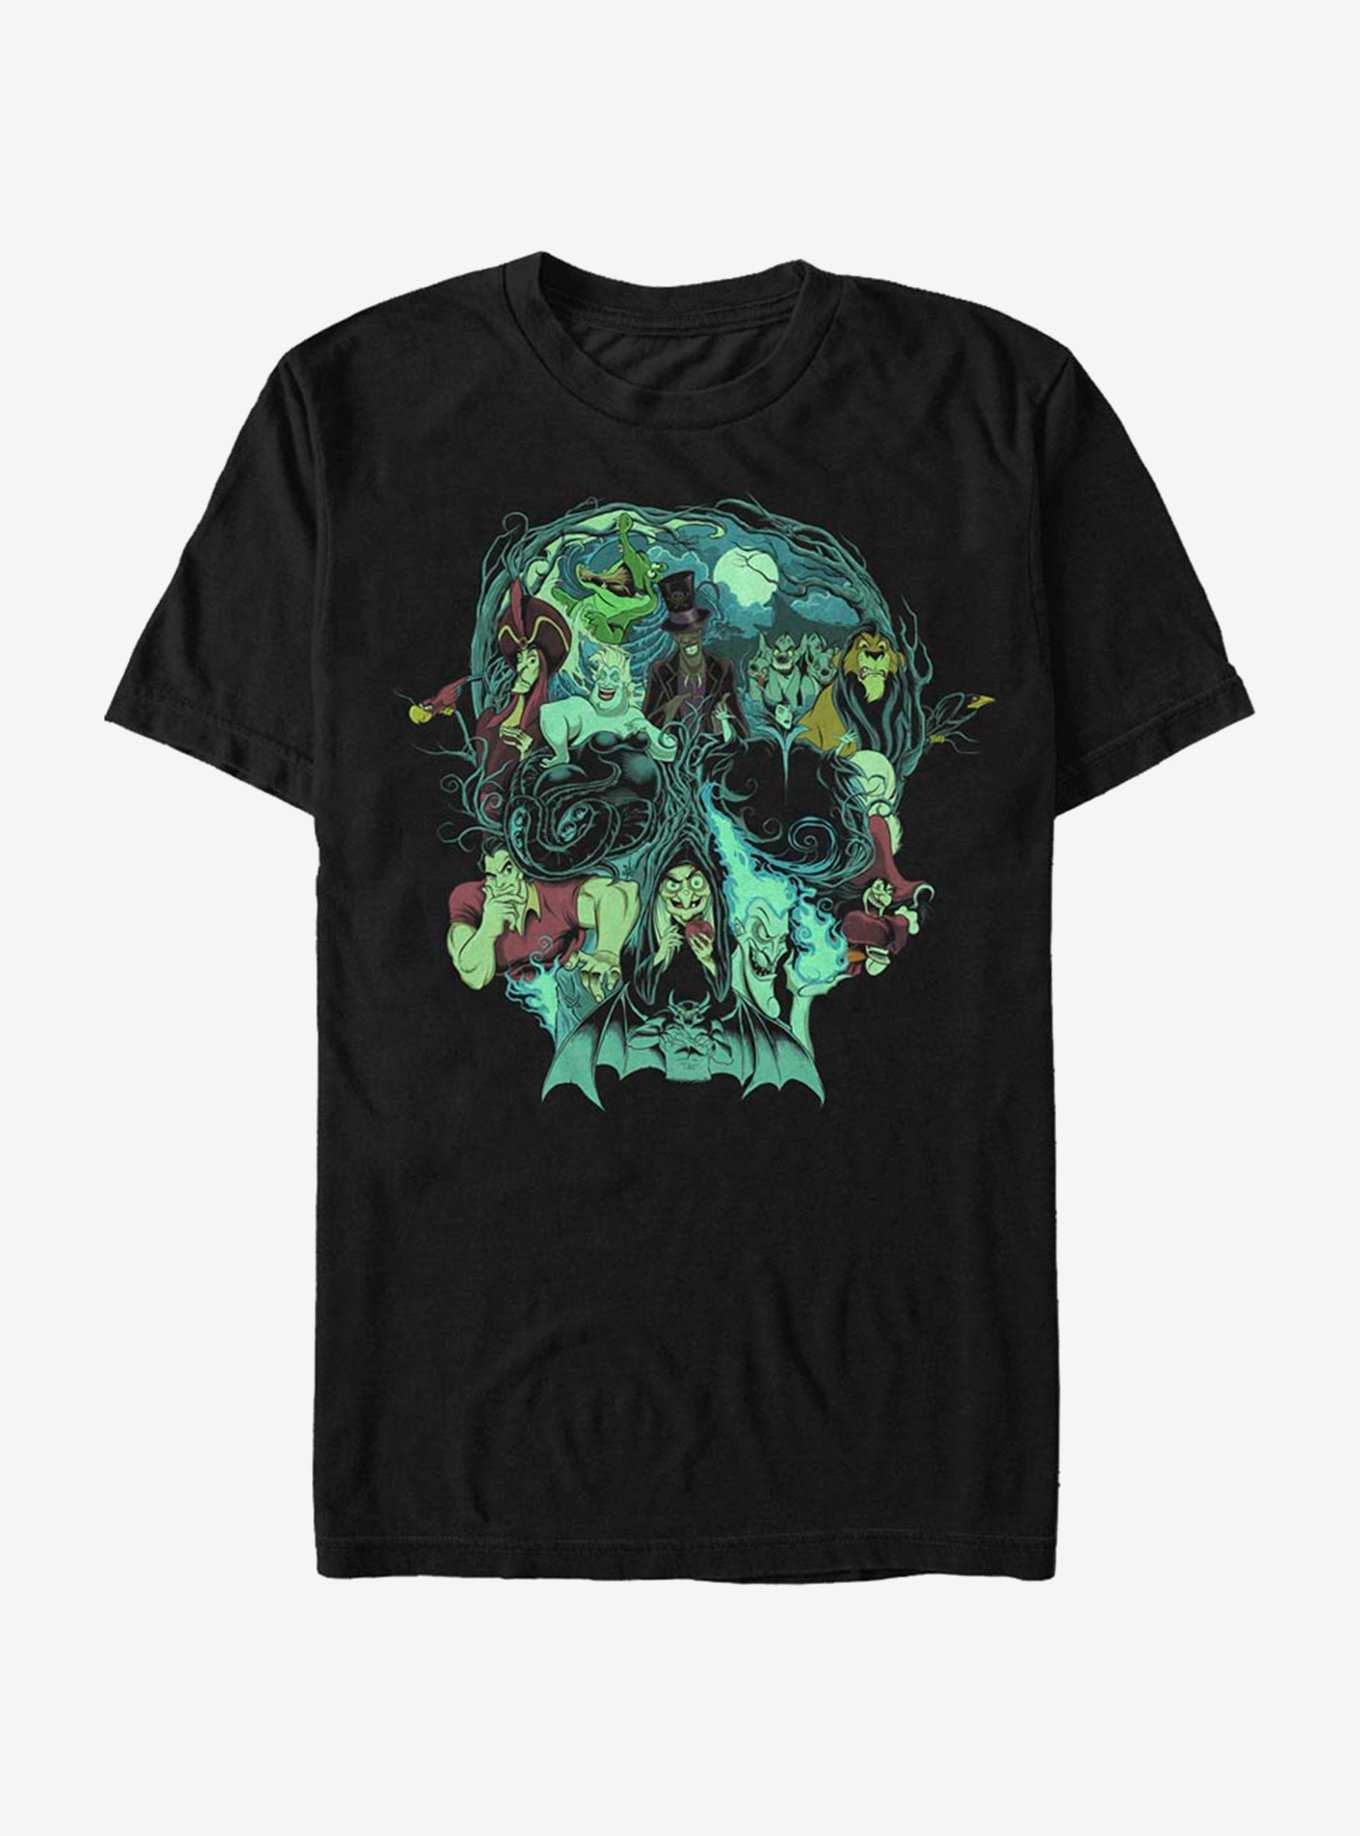 Scary Things Come in Small Packages | Official Disney Tee T-Shirt / Men's / 2XL